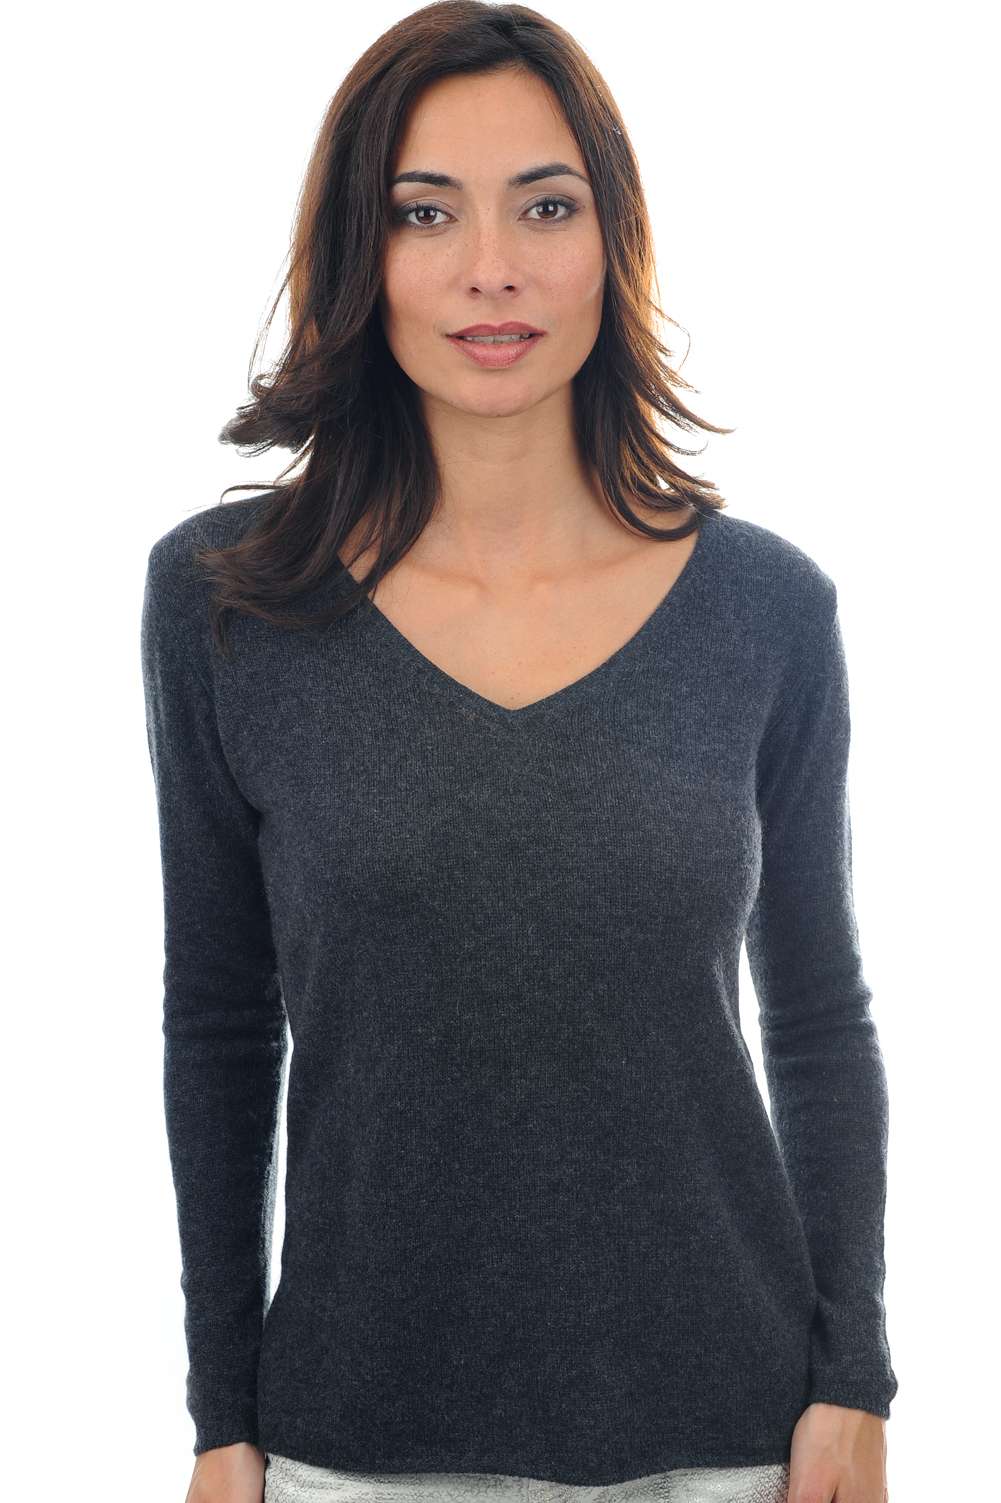 Cashmere ladies basic sweaters at low prices flavie charcoal marl 3xl